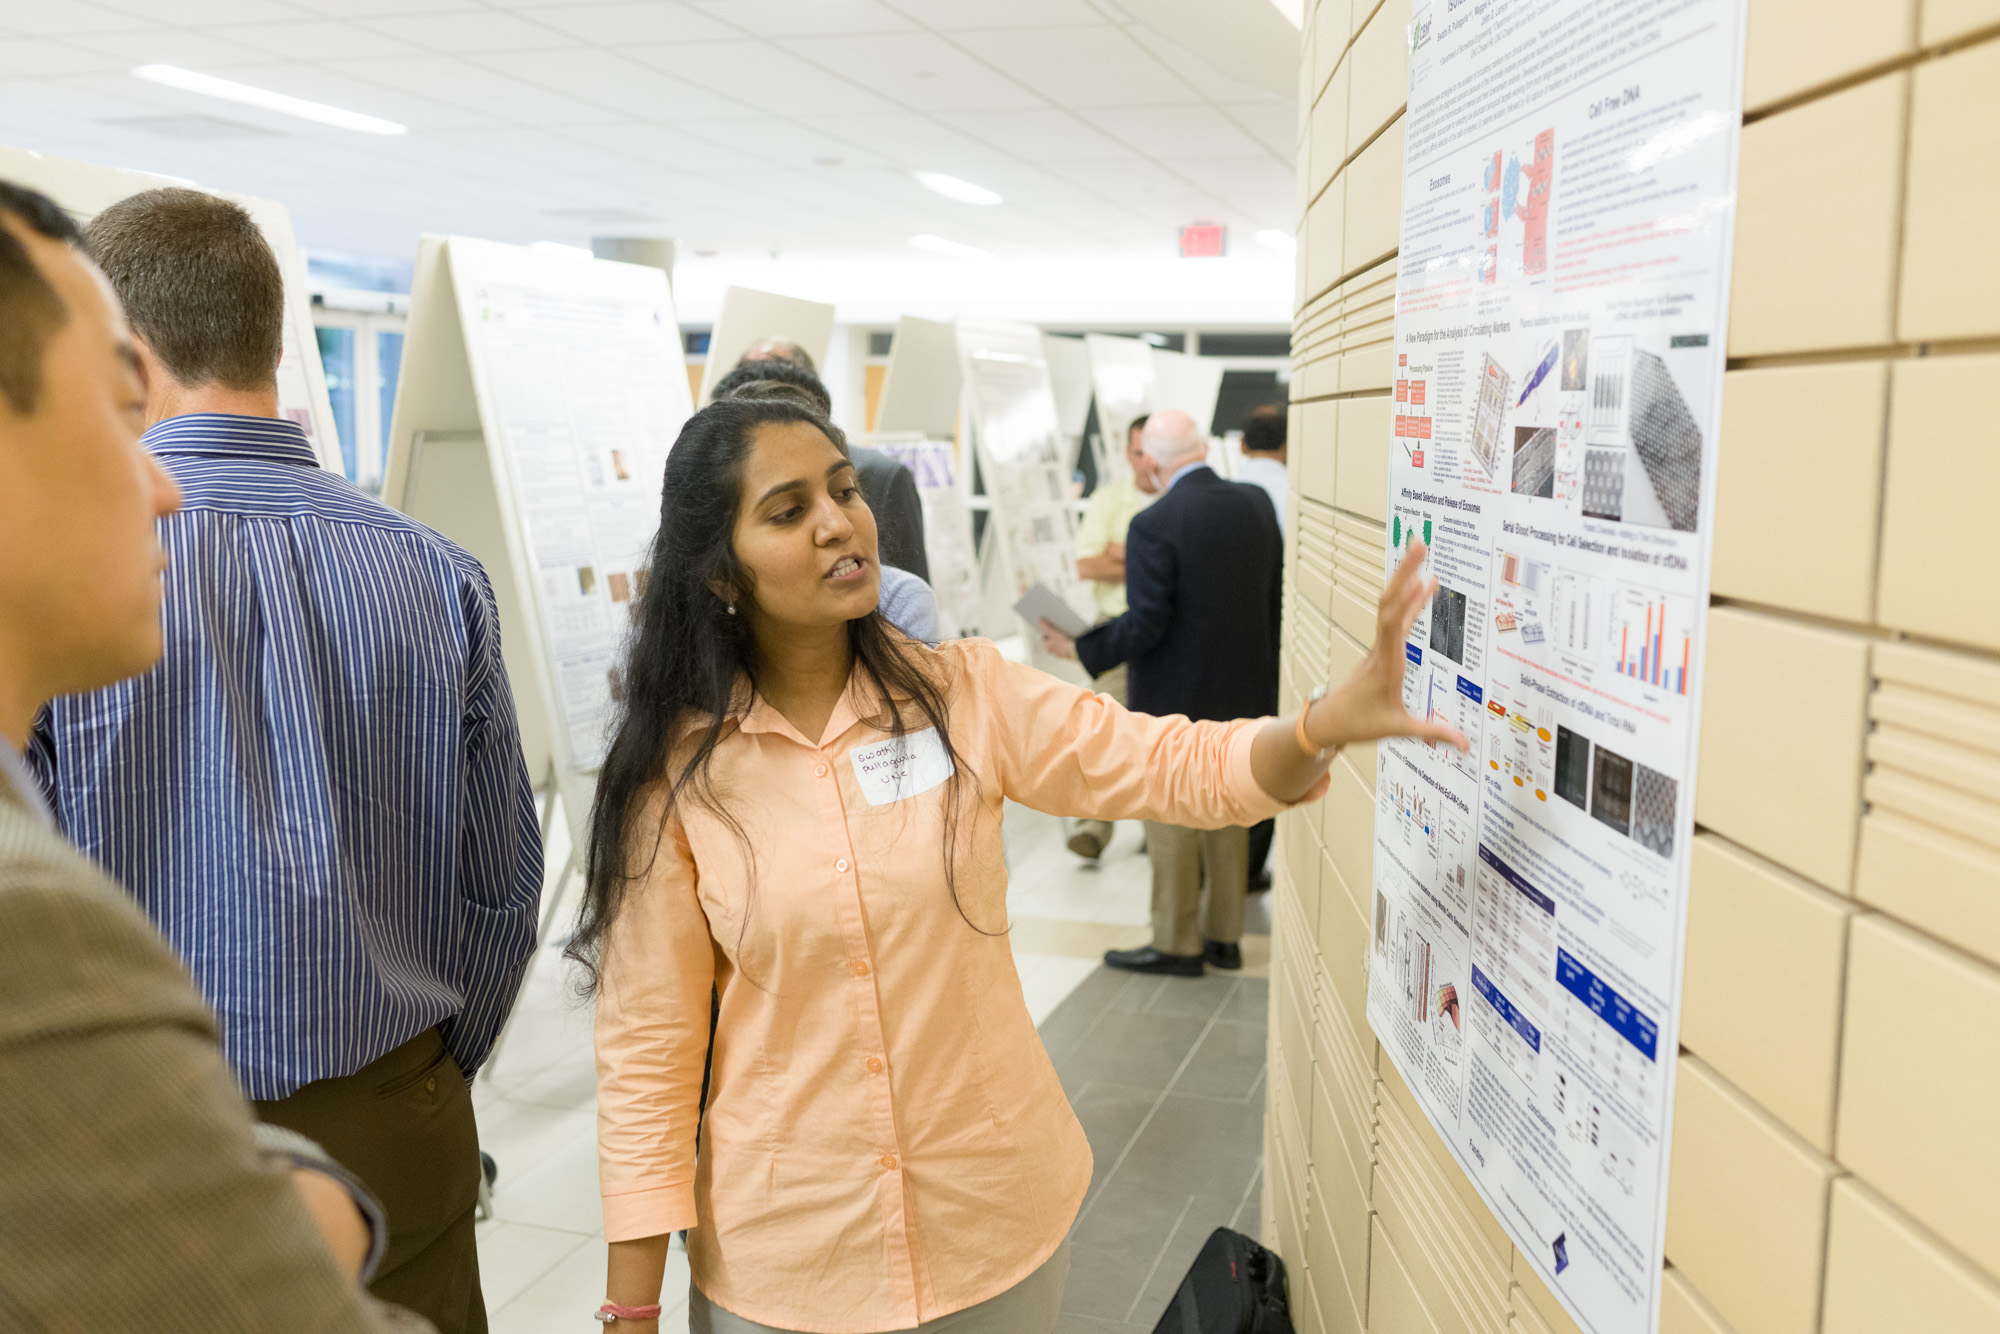 A woman is presenting a research poster at what appears to be an academic event, with other attendees and posters visible in the background.